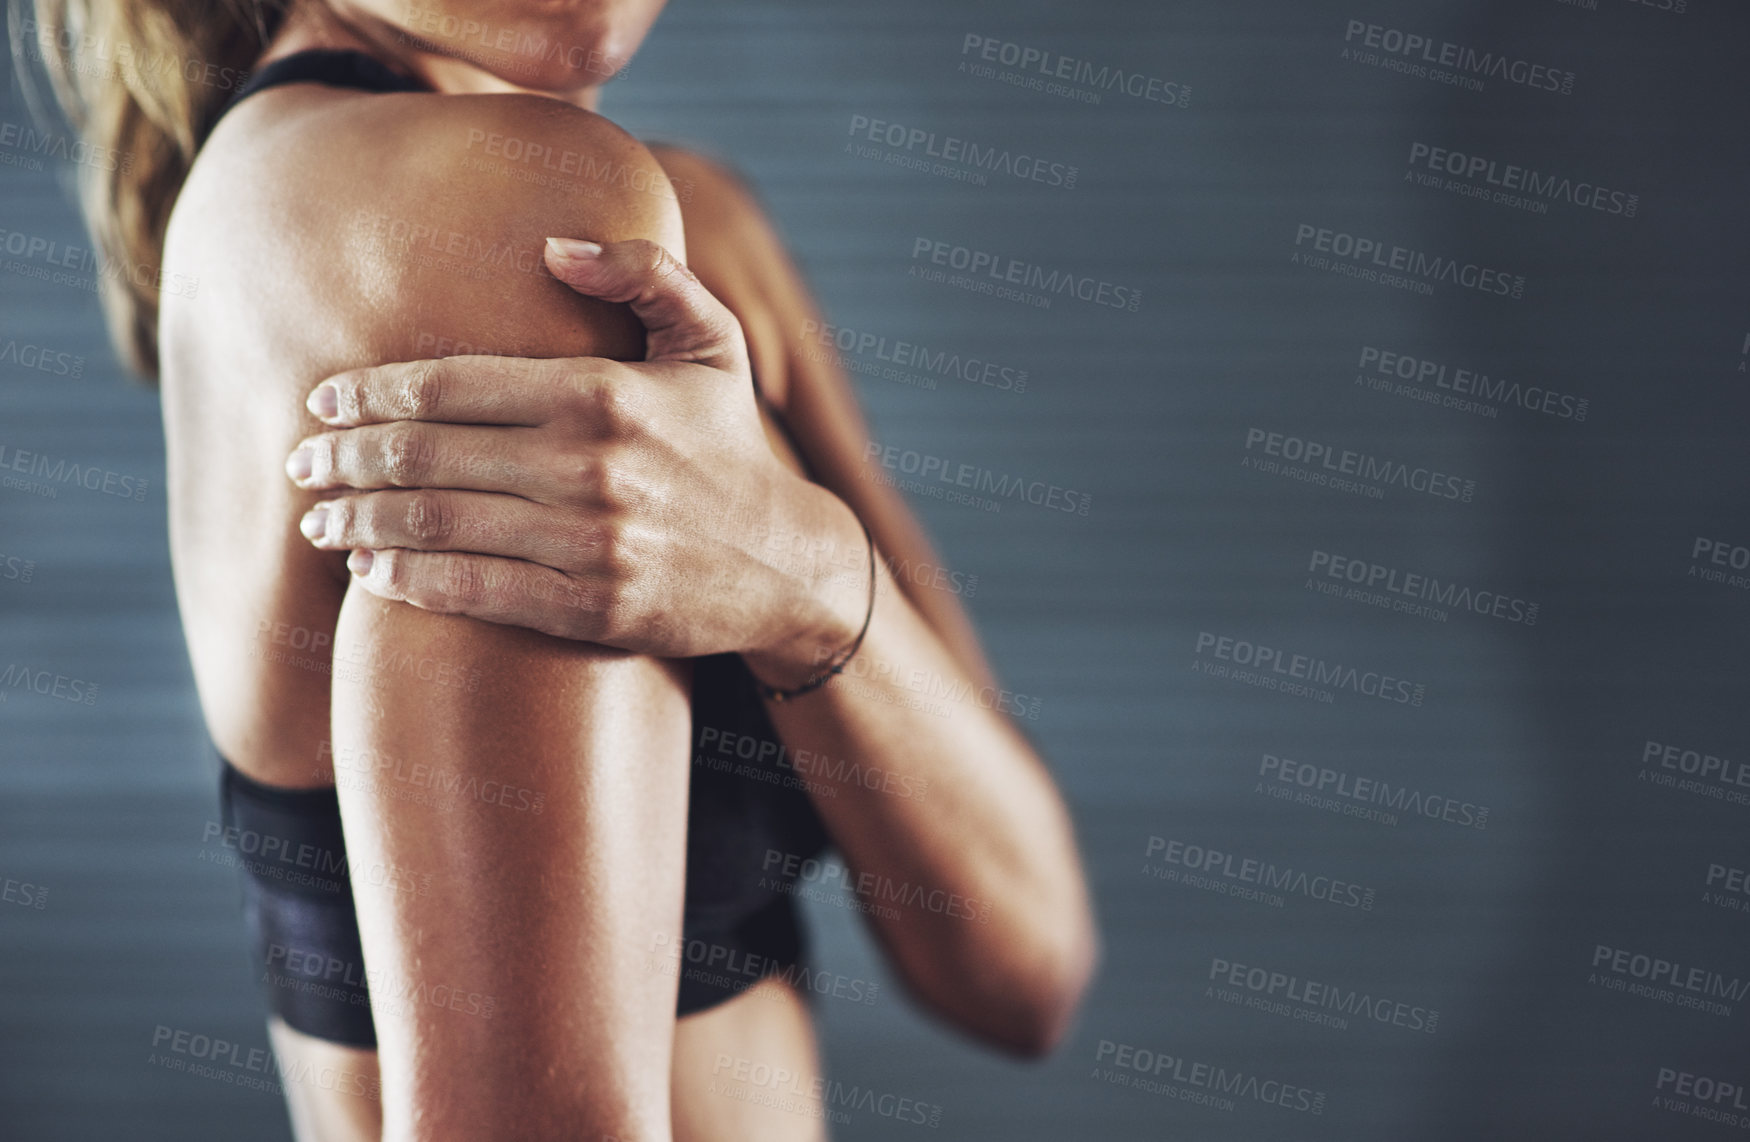 Buy stock photo Shot of a sportswoman with a shoulder injury